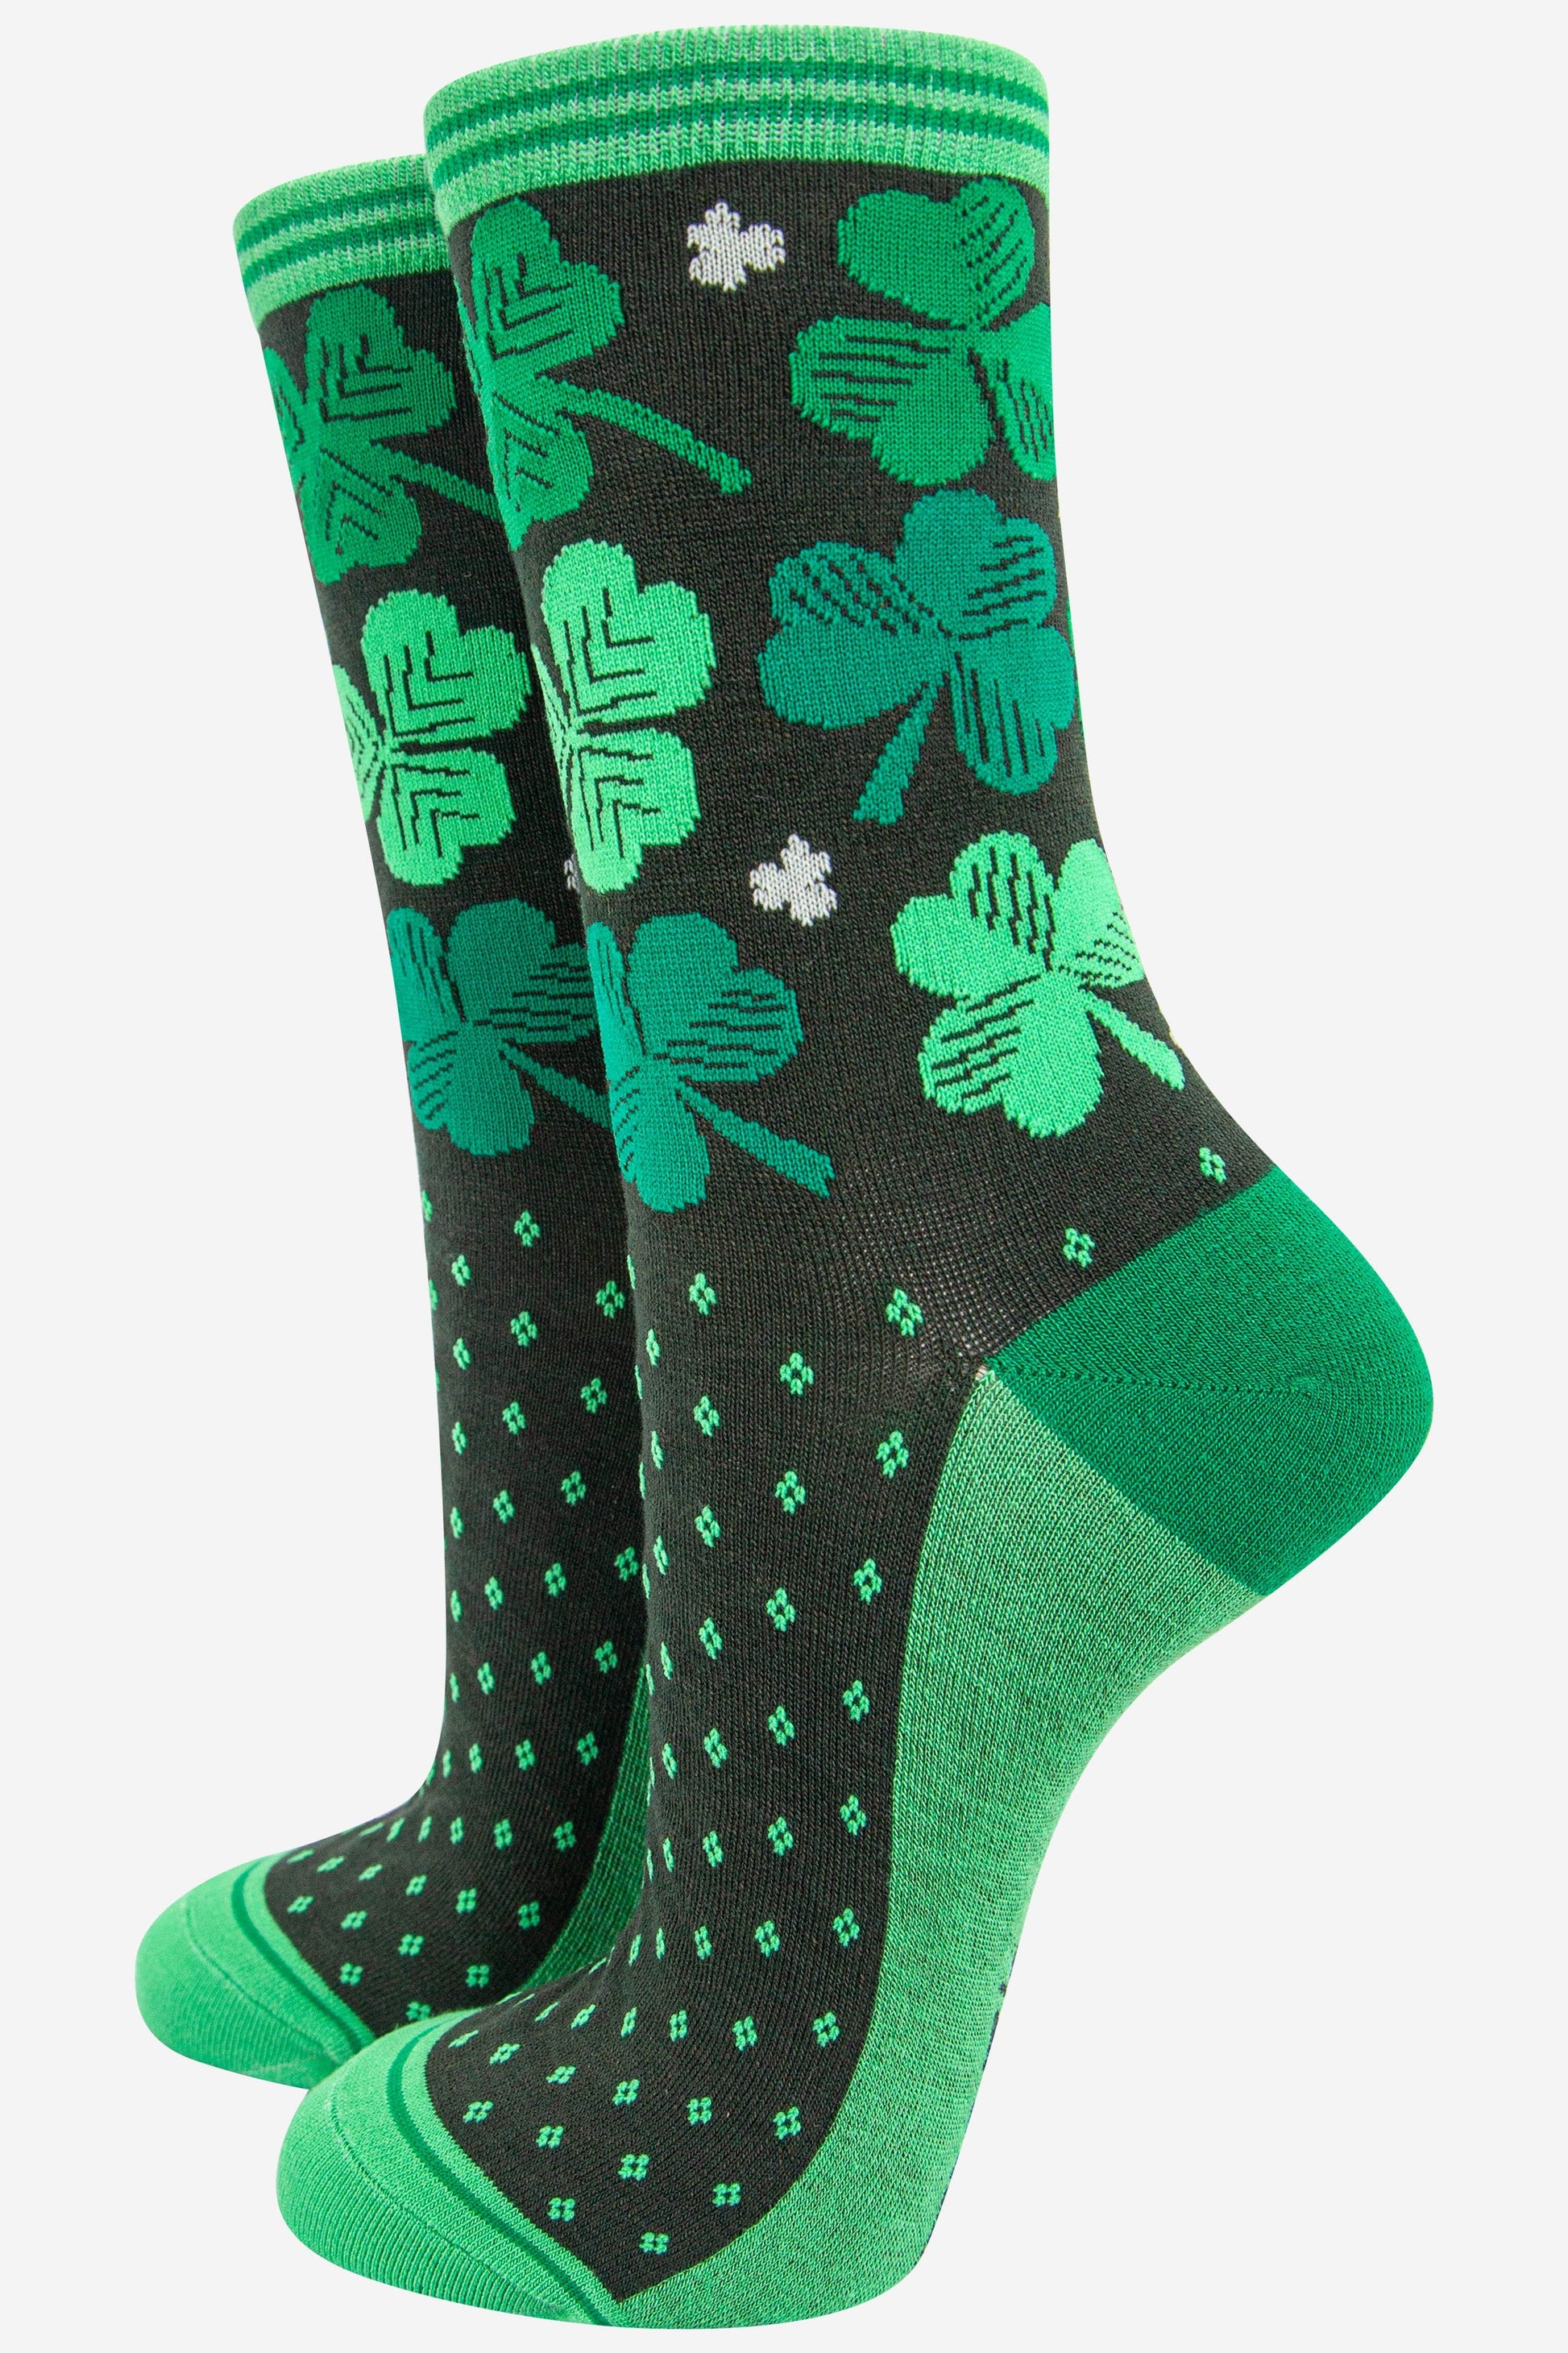 green and black ankle socks with irish shamrocks and four leaf clovers 